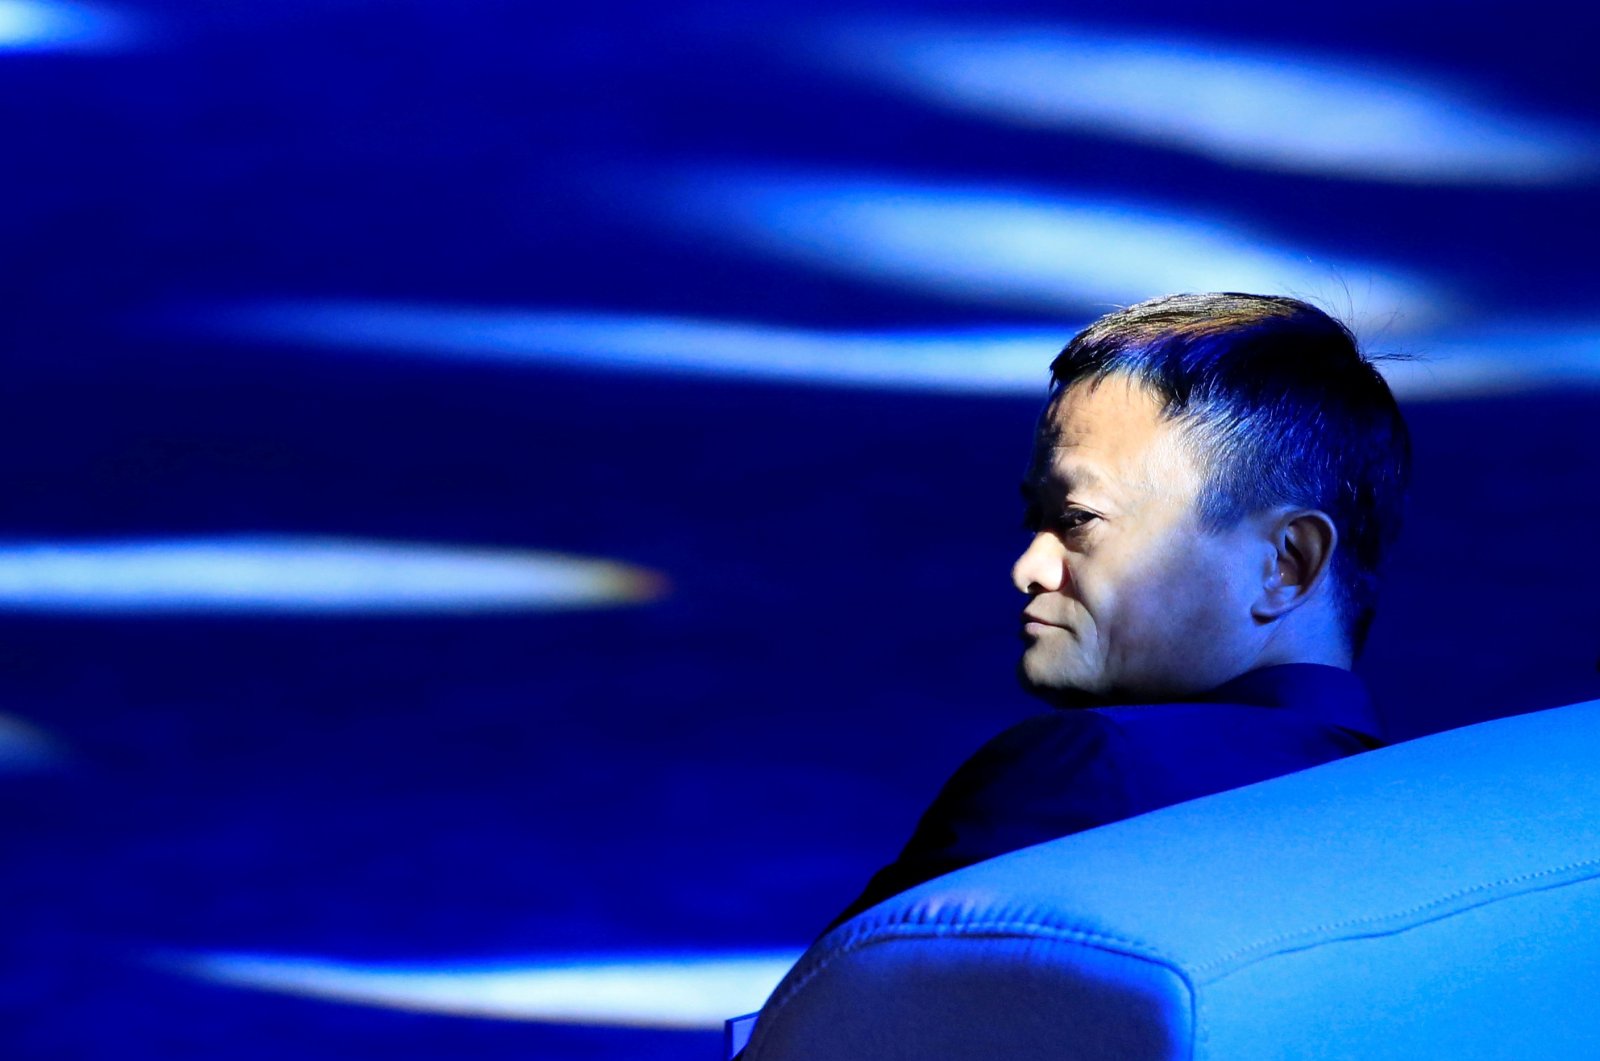 Alibaba Group co-founder and executive chairperson Jack Ma attends the World Artificial Intelligence Conference (WAIC) in Shanghai, China, Sept. 17, 2018. (Reuters Photo)